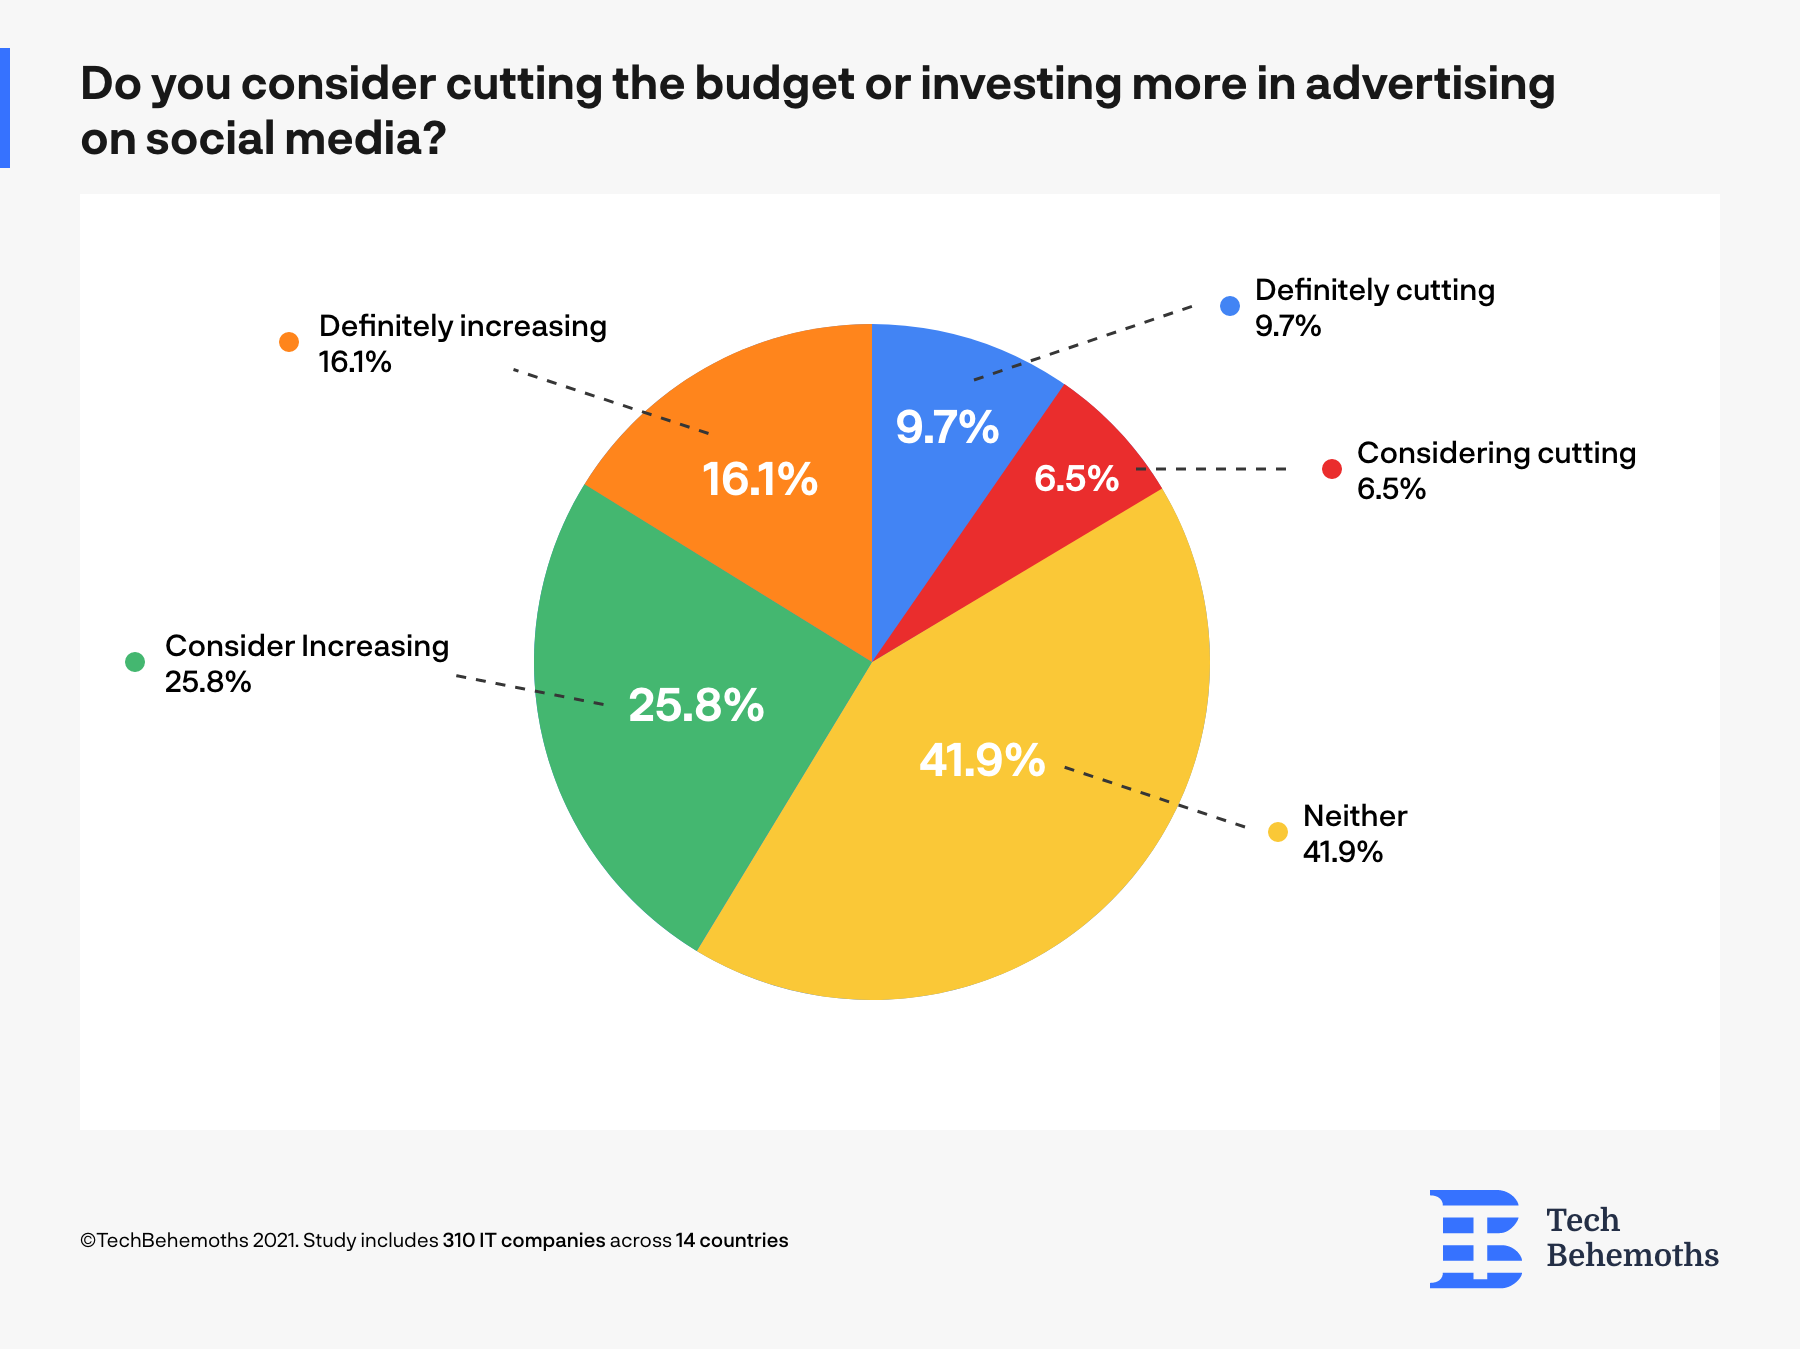 Most of IT companies consider increasing their budget for social media activities